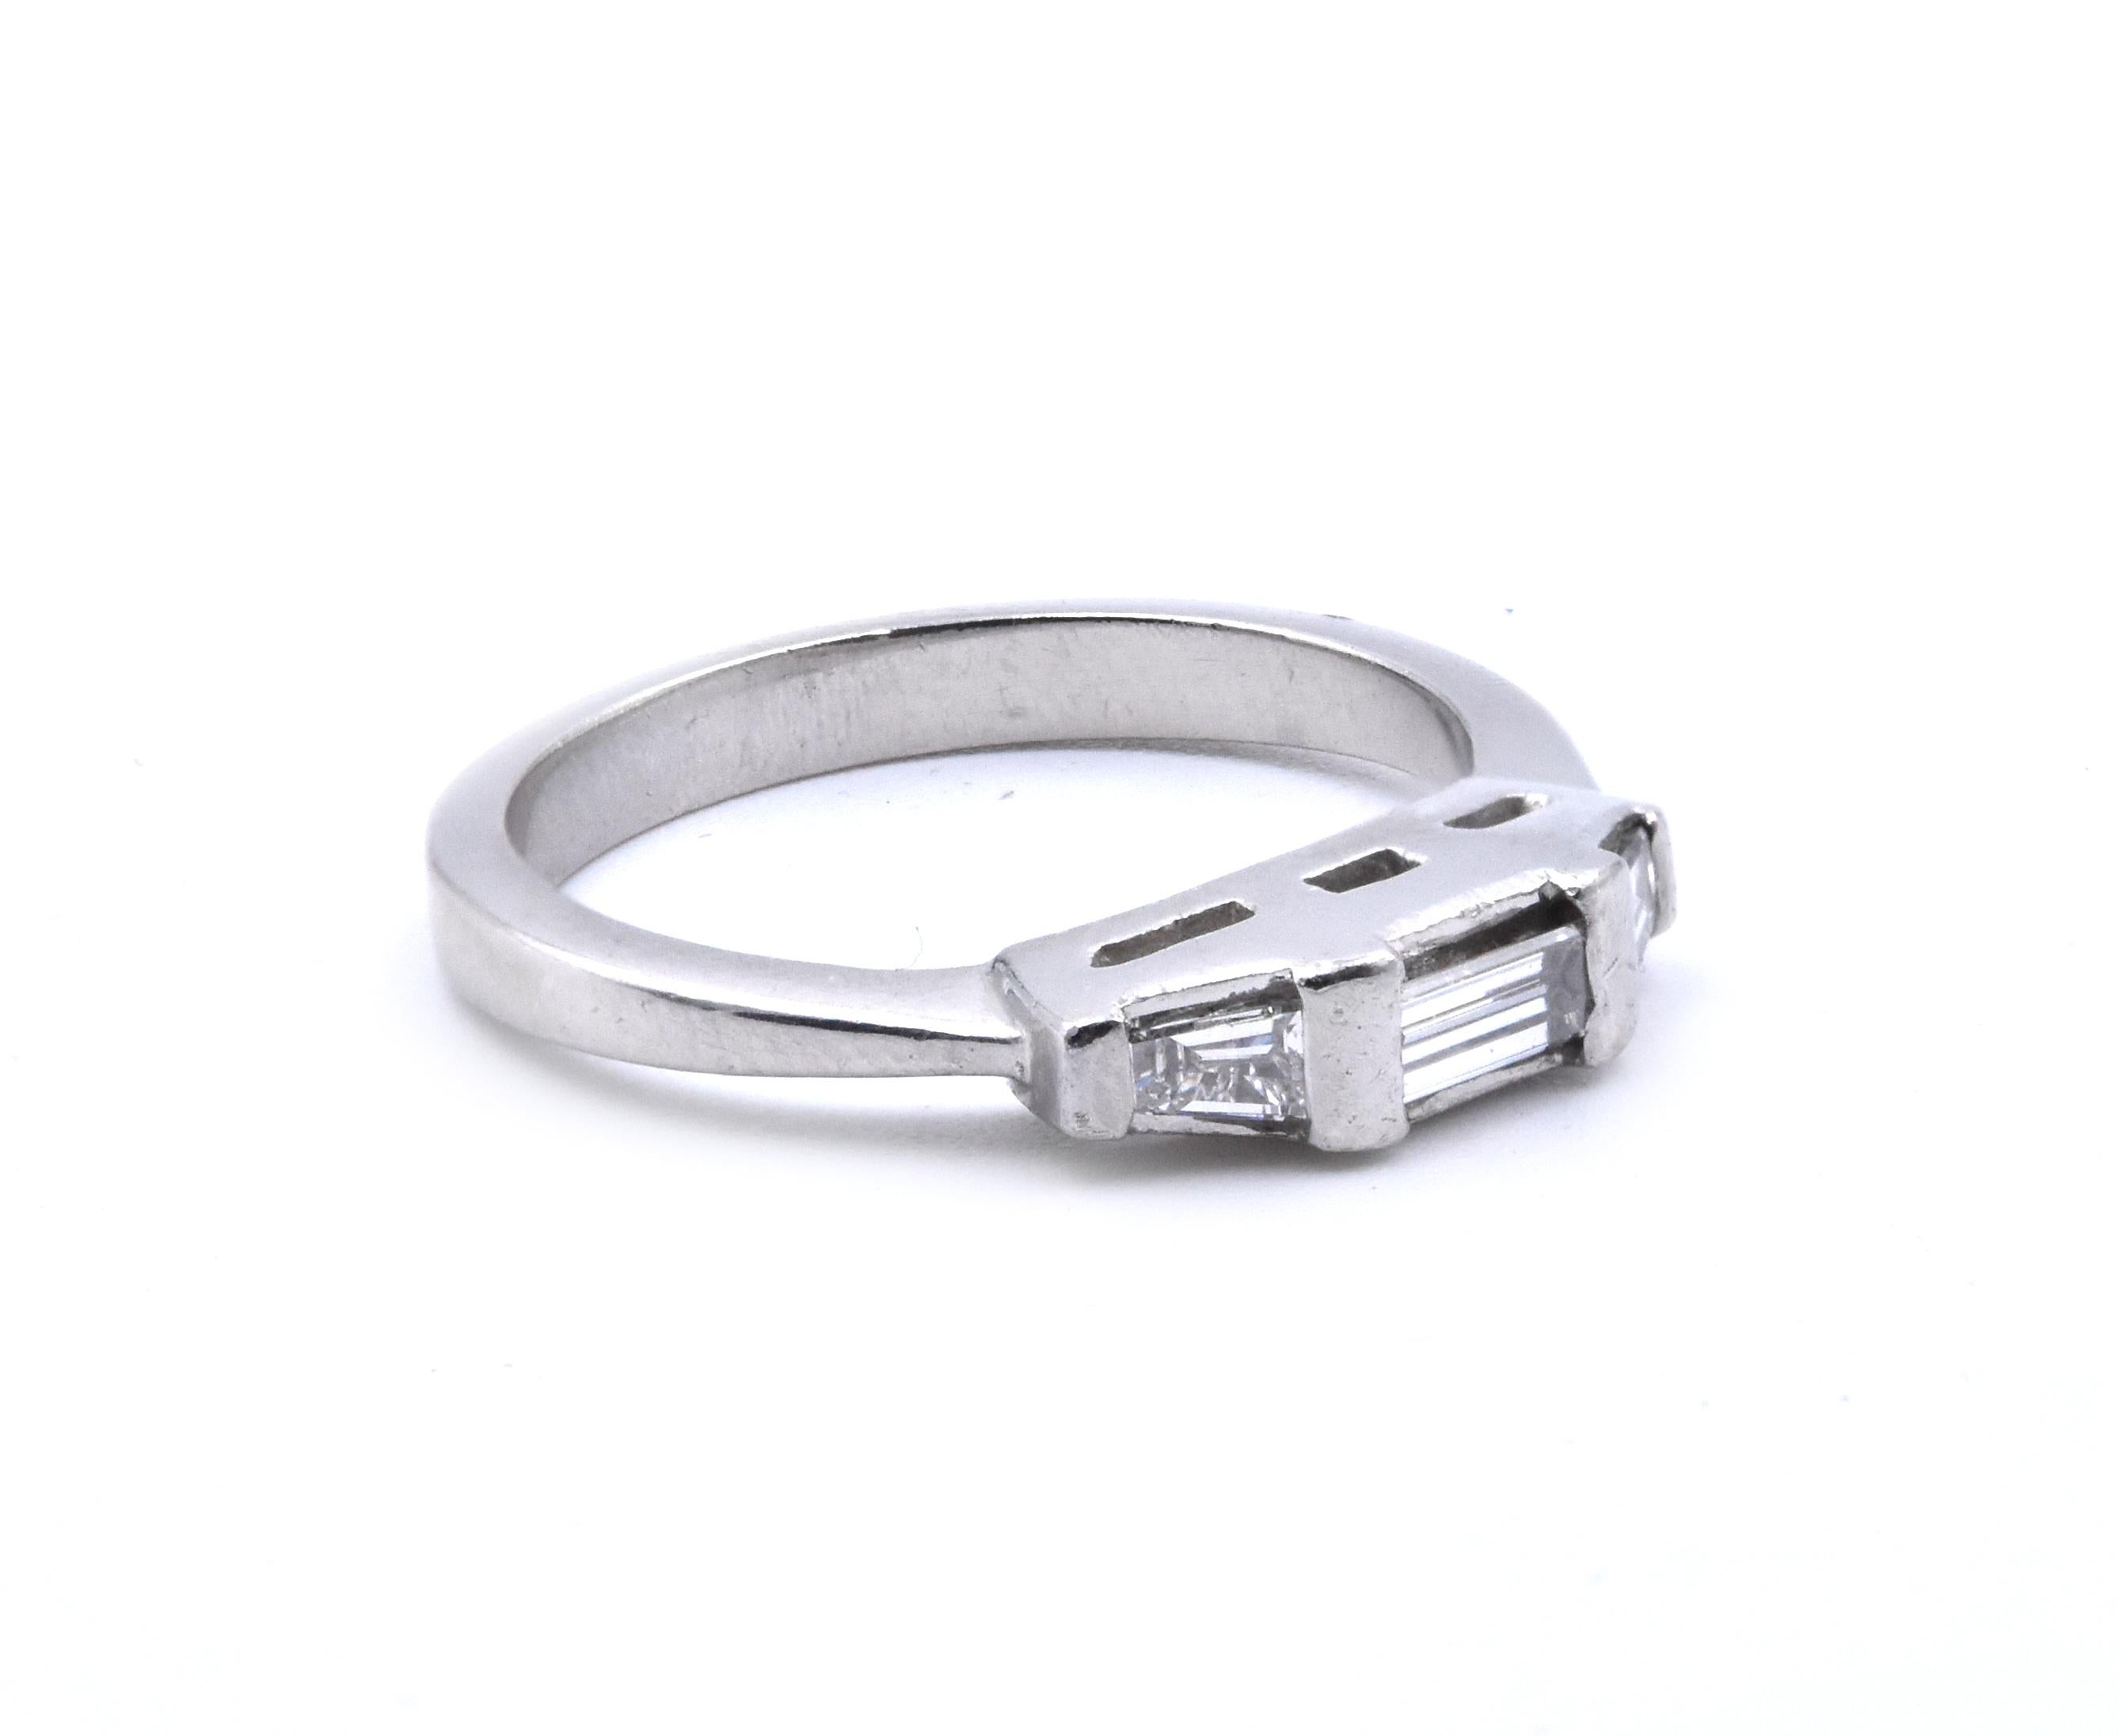 Designer: custom
Material: platinum
Diamonds: 3 baguette cut = .30cttw
Color: I
Clarity: SI2
Size: 5 (please allow two additional shipping days for sizing requests)  
Dimensions: ring measures 3.5mm in width
Weight: 4.9 grams